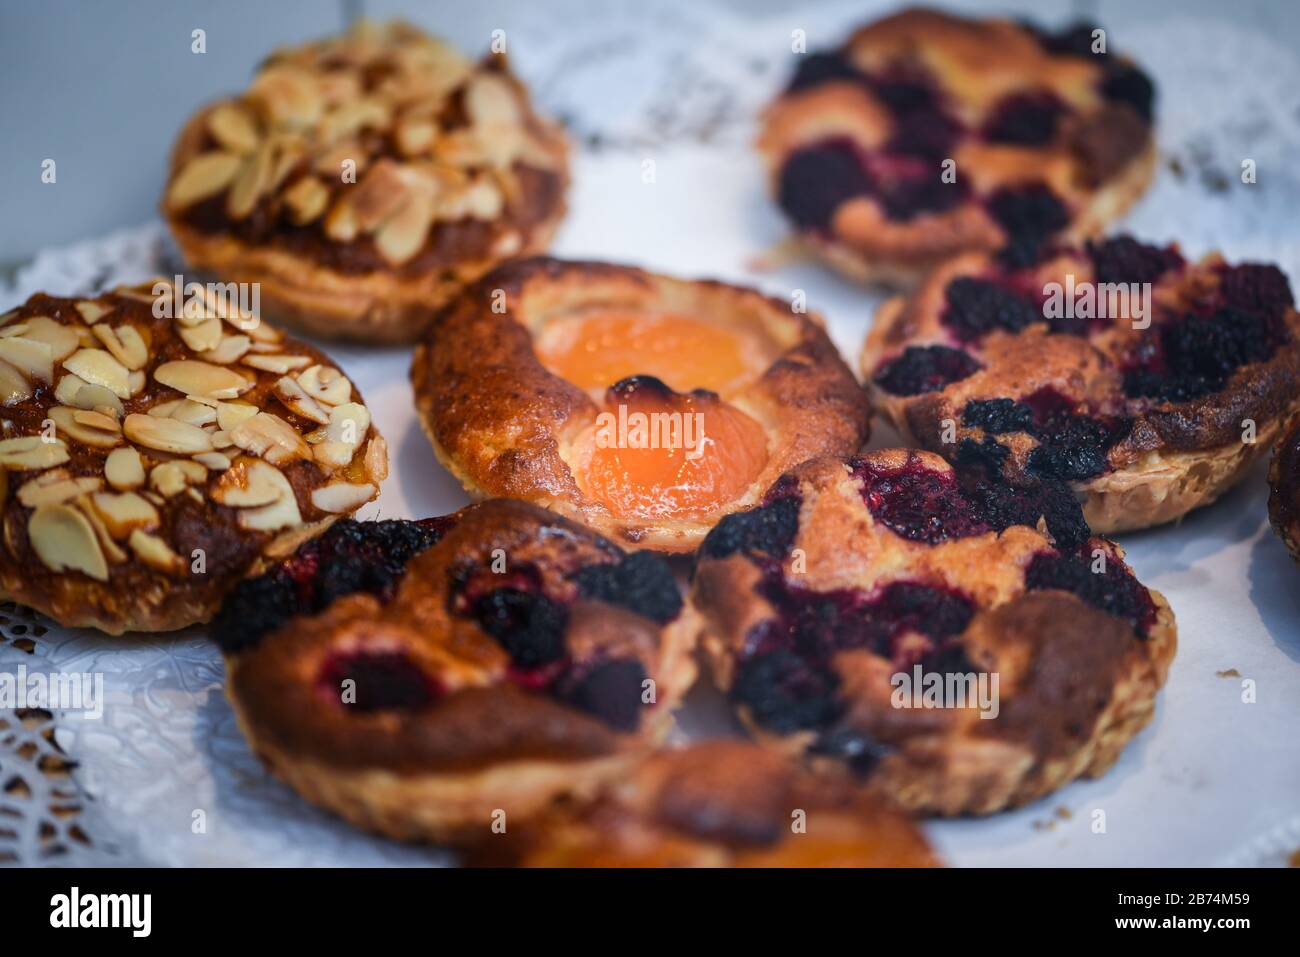 delicious czech bakery breakfast dishes Stock Photo